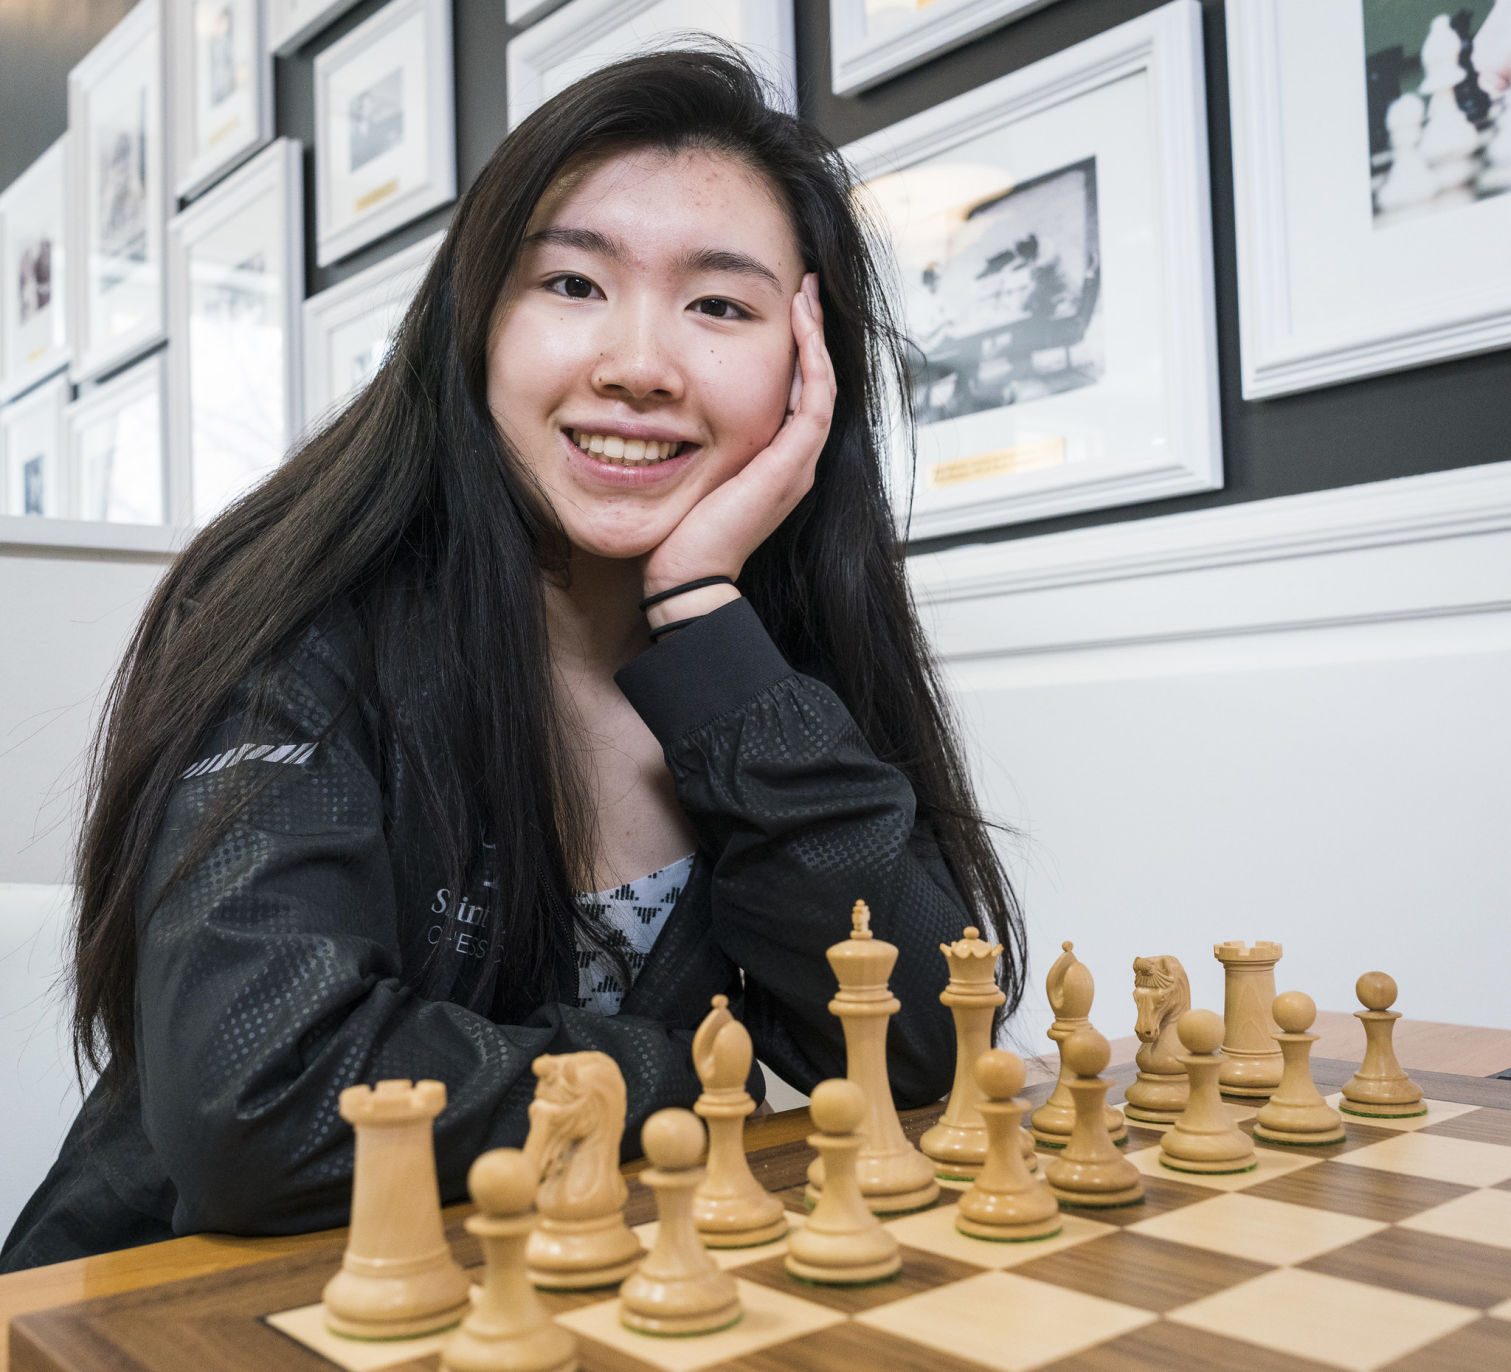 This teenage chess player from Ashburn is among the worlds best News loudountimes